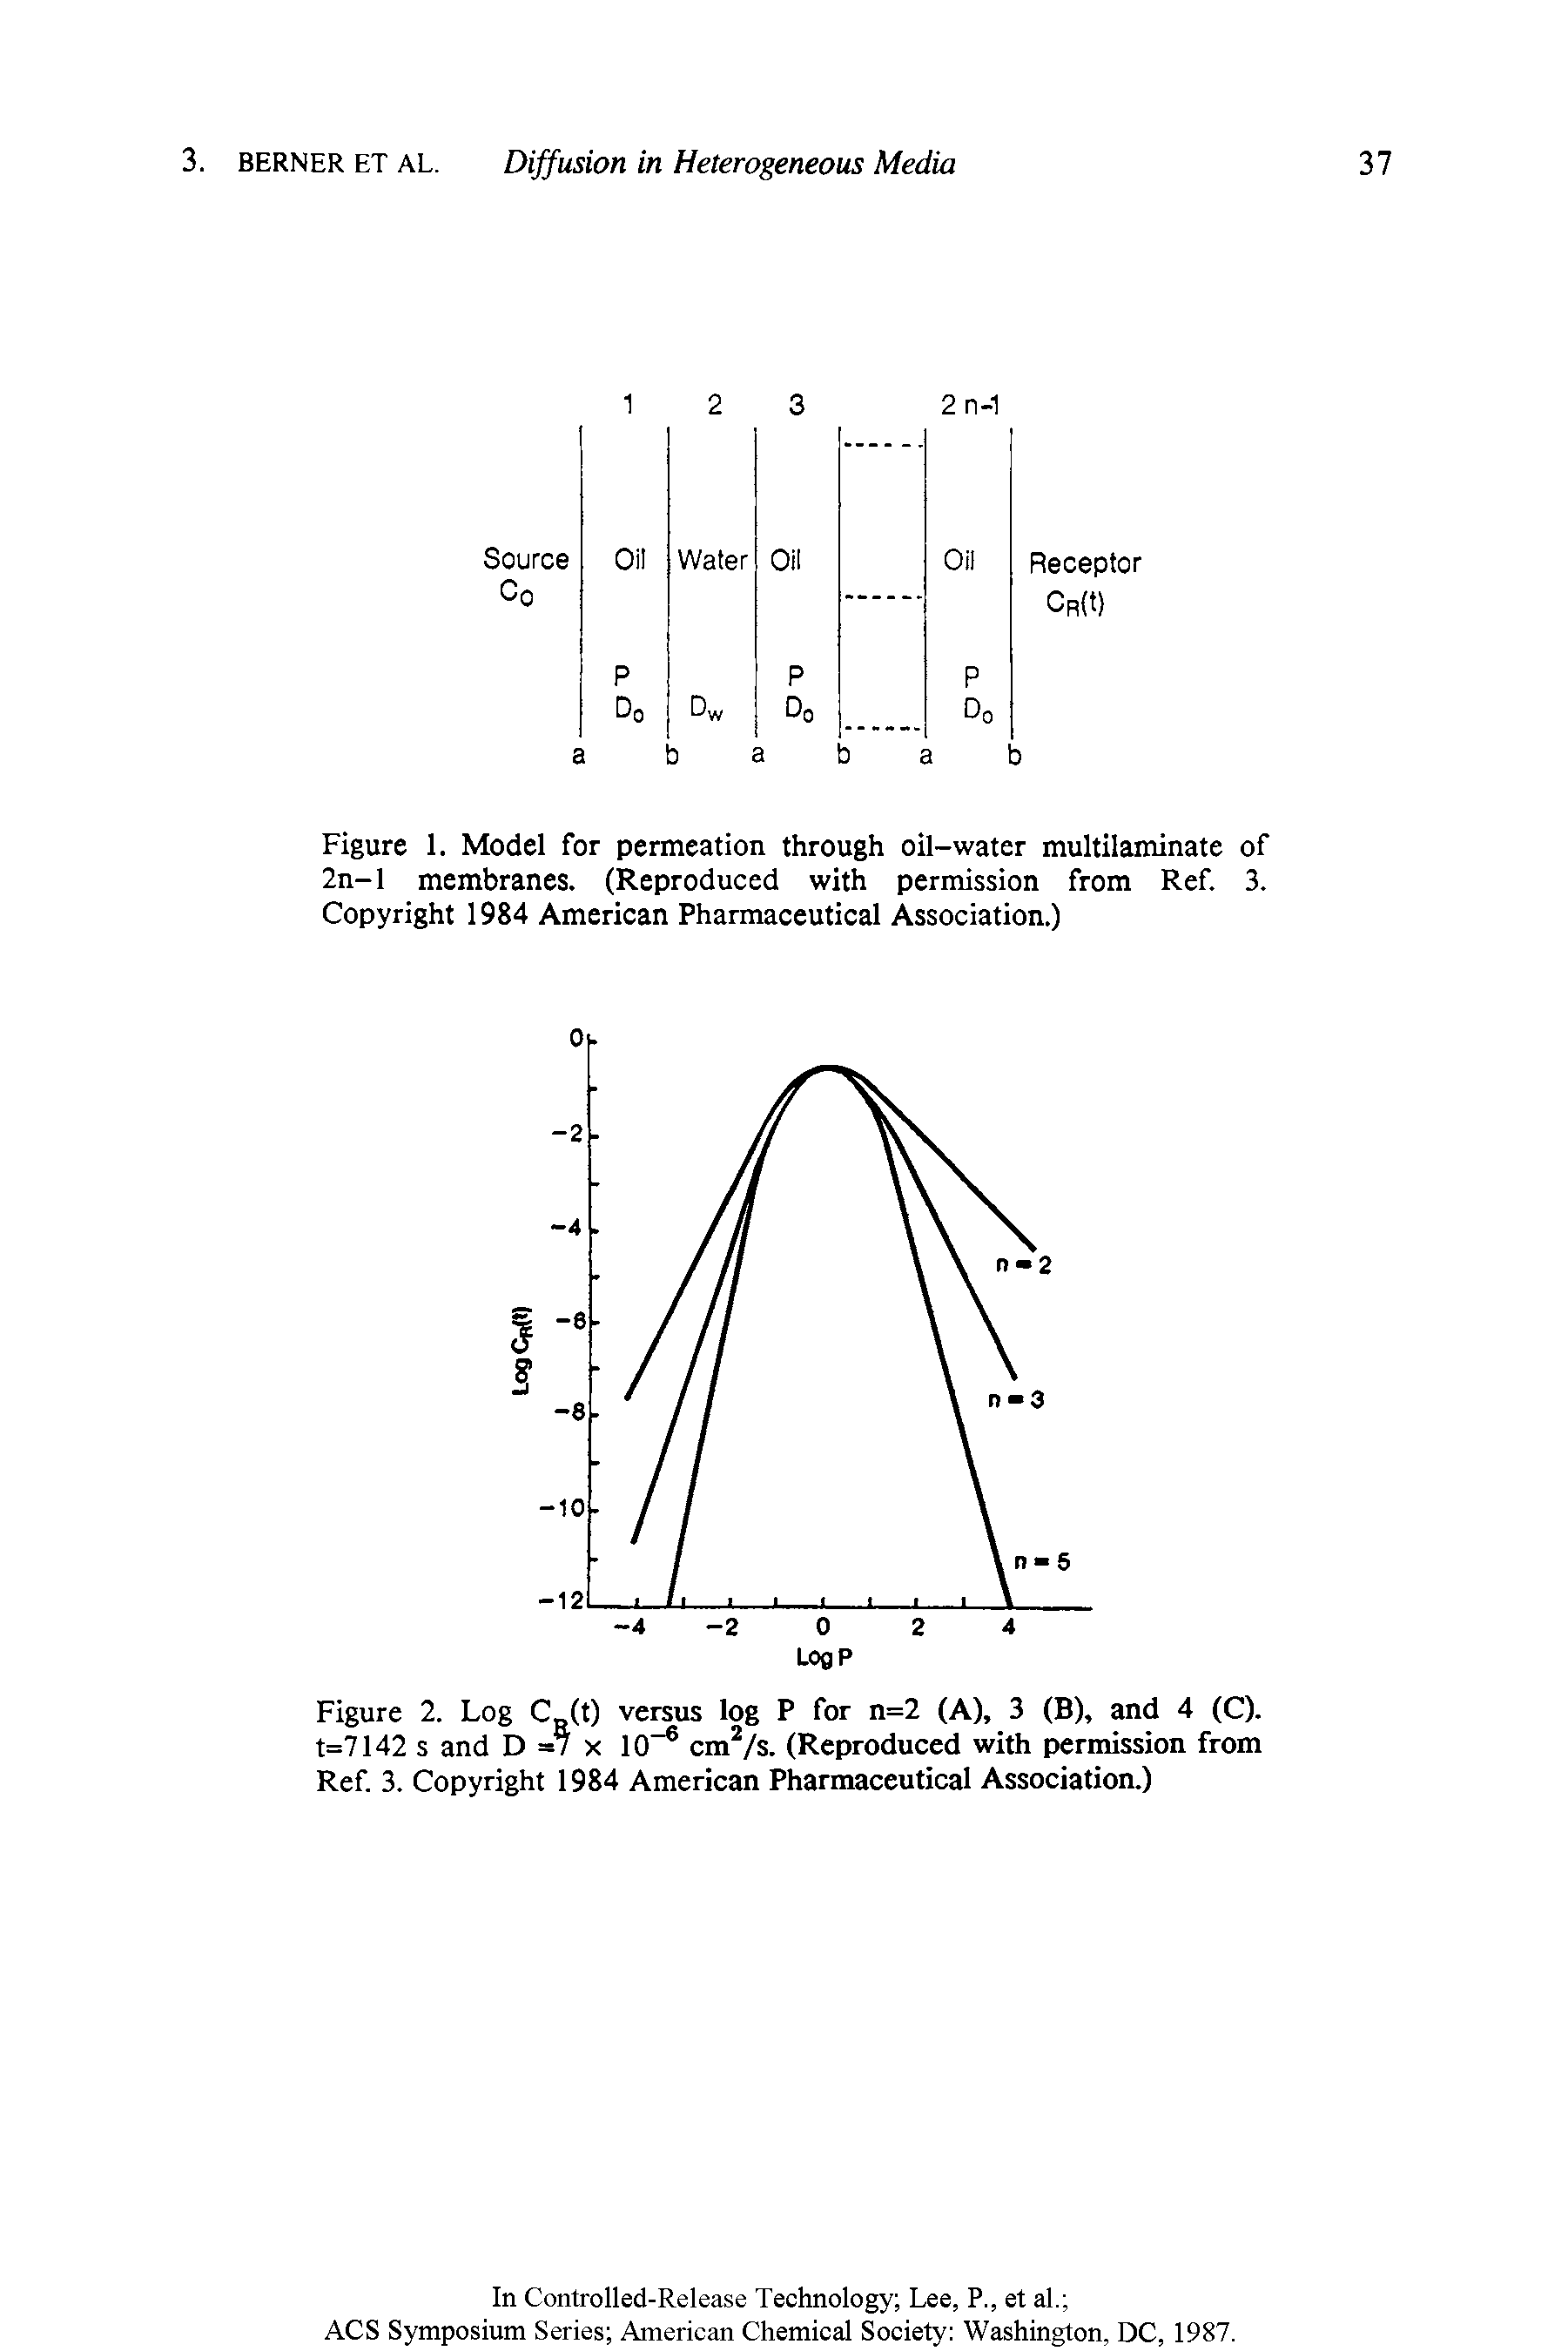 Figure 1. Model for permeation through oil-water multilaminate of 2n-l membranes. (Reproduced with permission from Ref. 3. Copyright 1984 American Pharmaceutical Association.)...